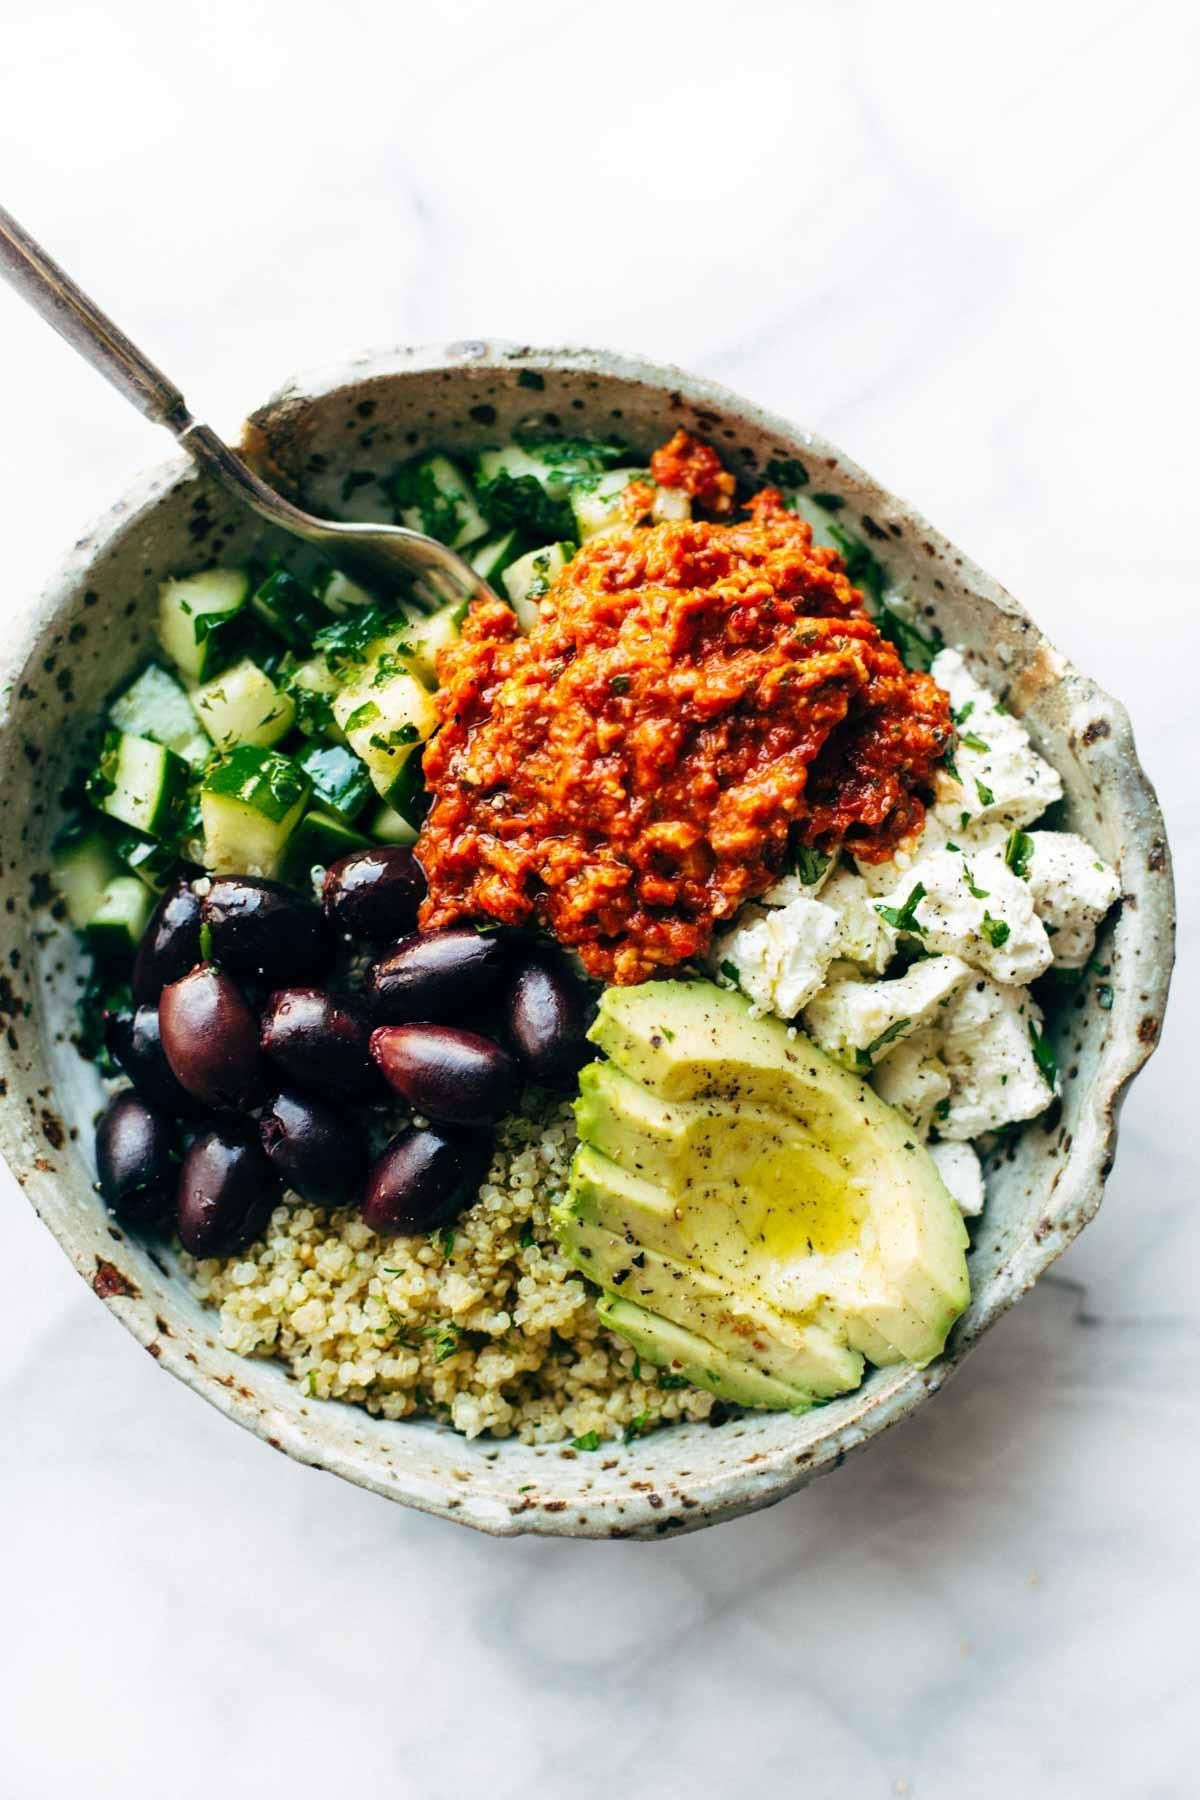 Mediterranean Quinoa Bowl with Roasted Red Pepper Sauce – a 20-minute healthy recipe concept! Use what